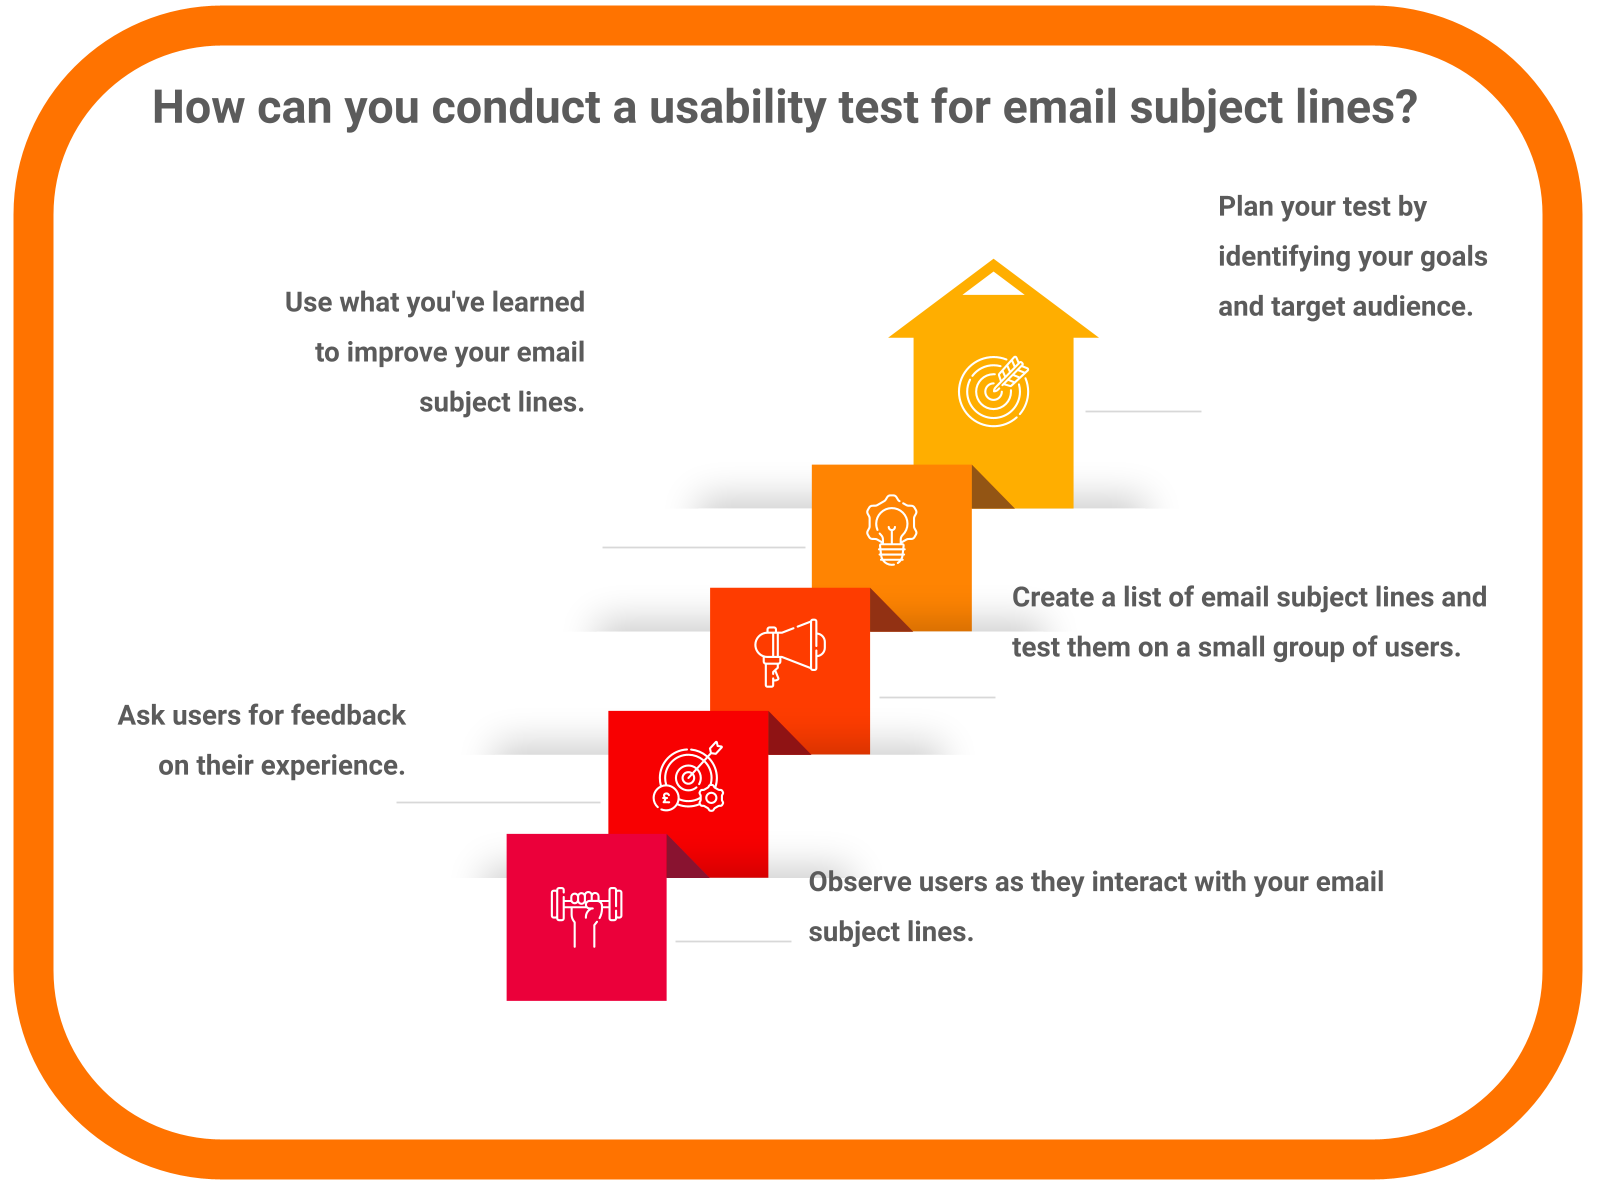 How can you conduct a usability test for email subject lines?